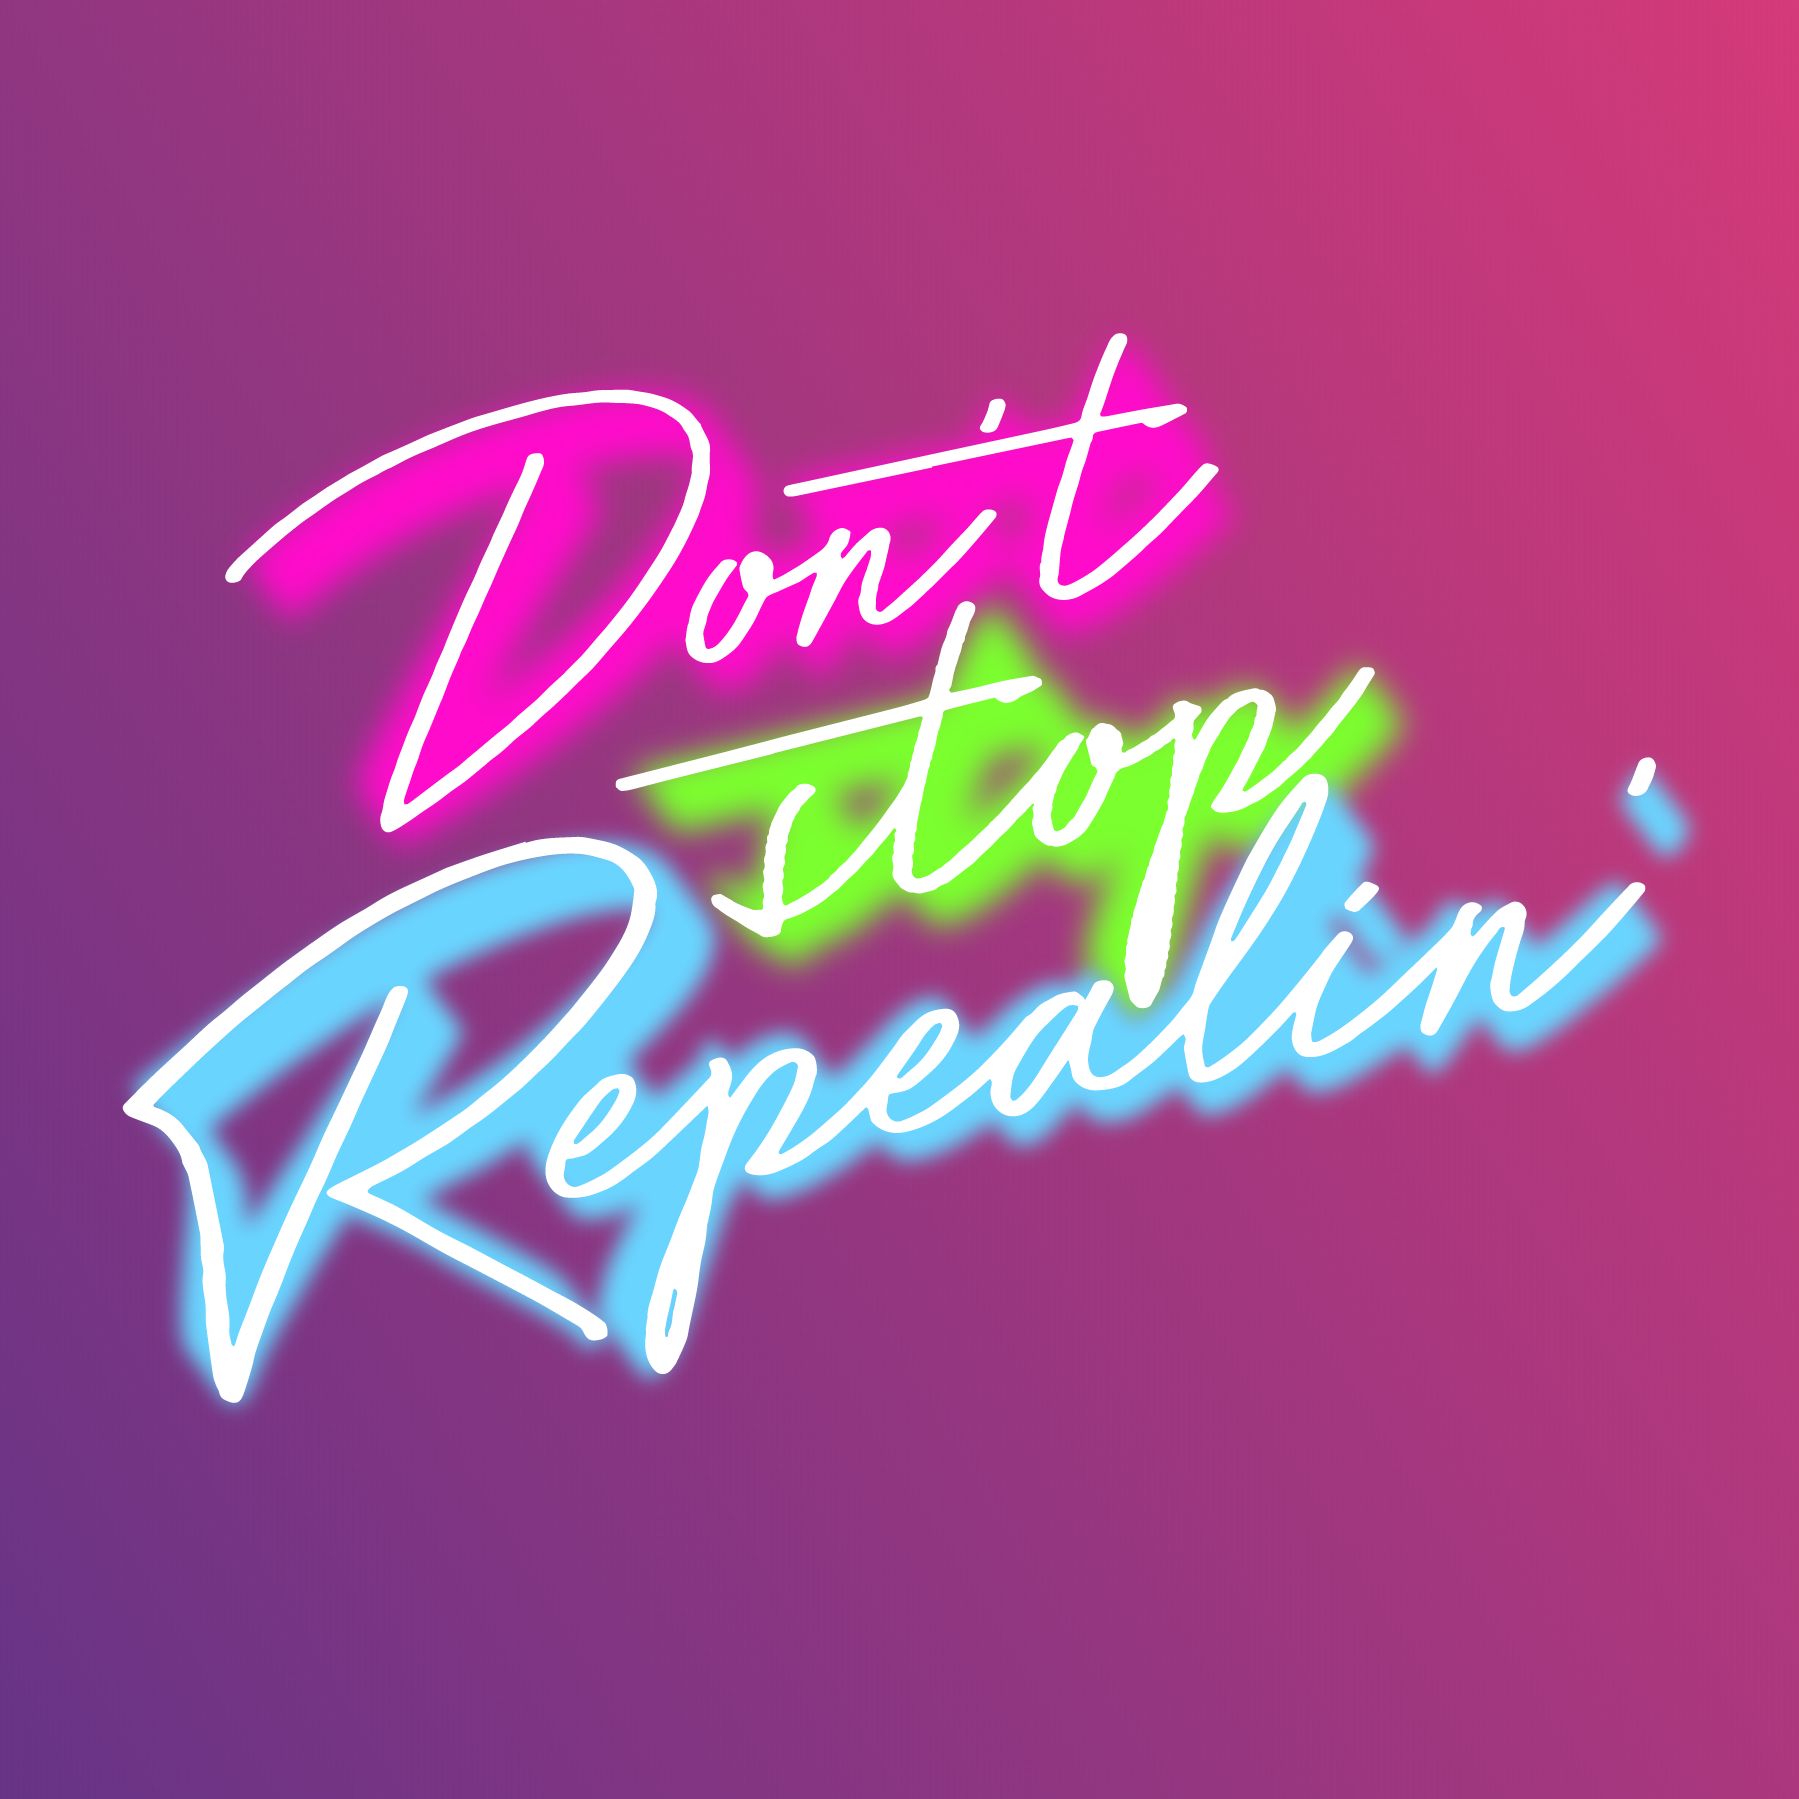 Don't stop repealin' - the repeal the eighth podcast podcast show image